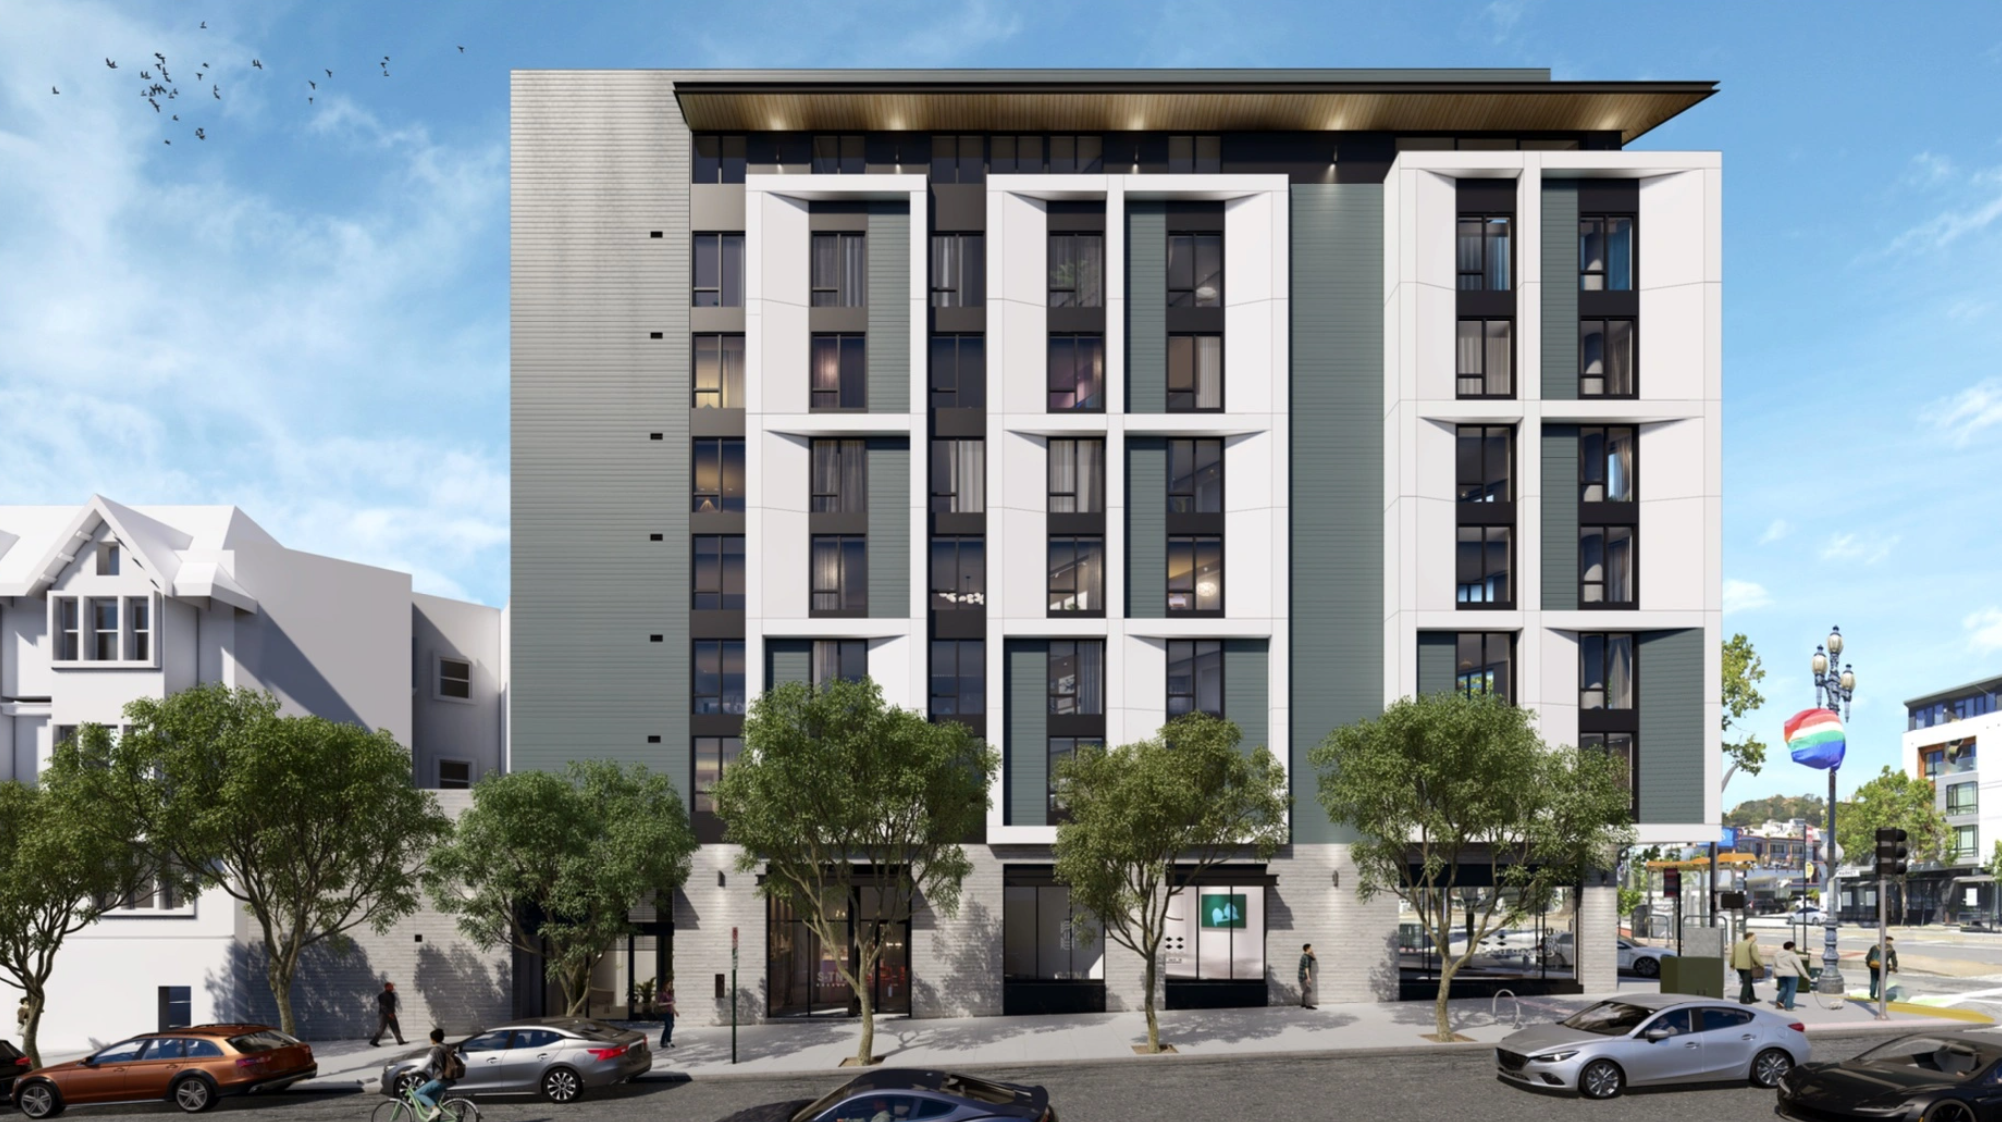 A rendering shows a proposed eight-story building at 2201 Market St. in San Francisco’s Duboce Triangle neighborhood.